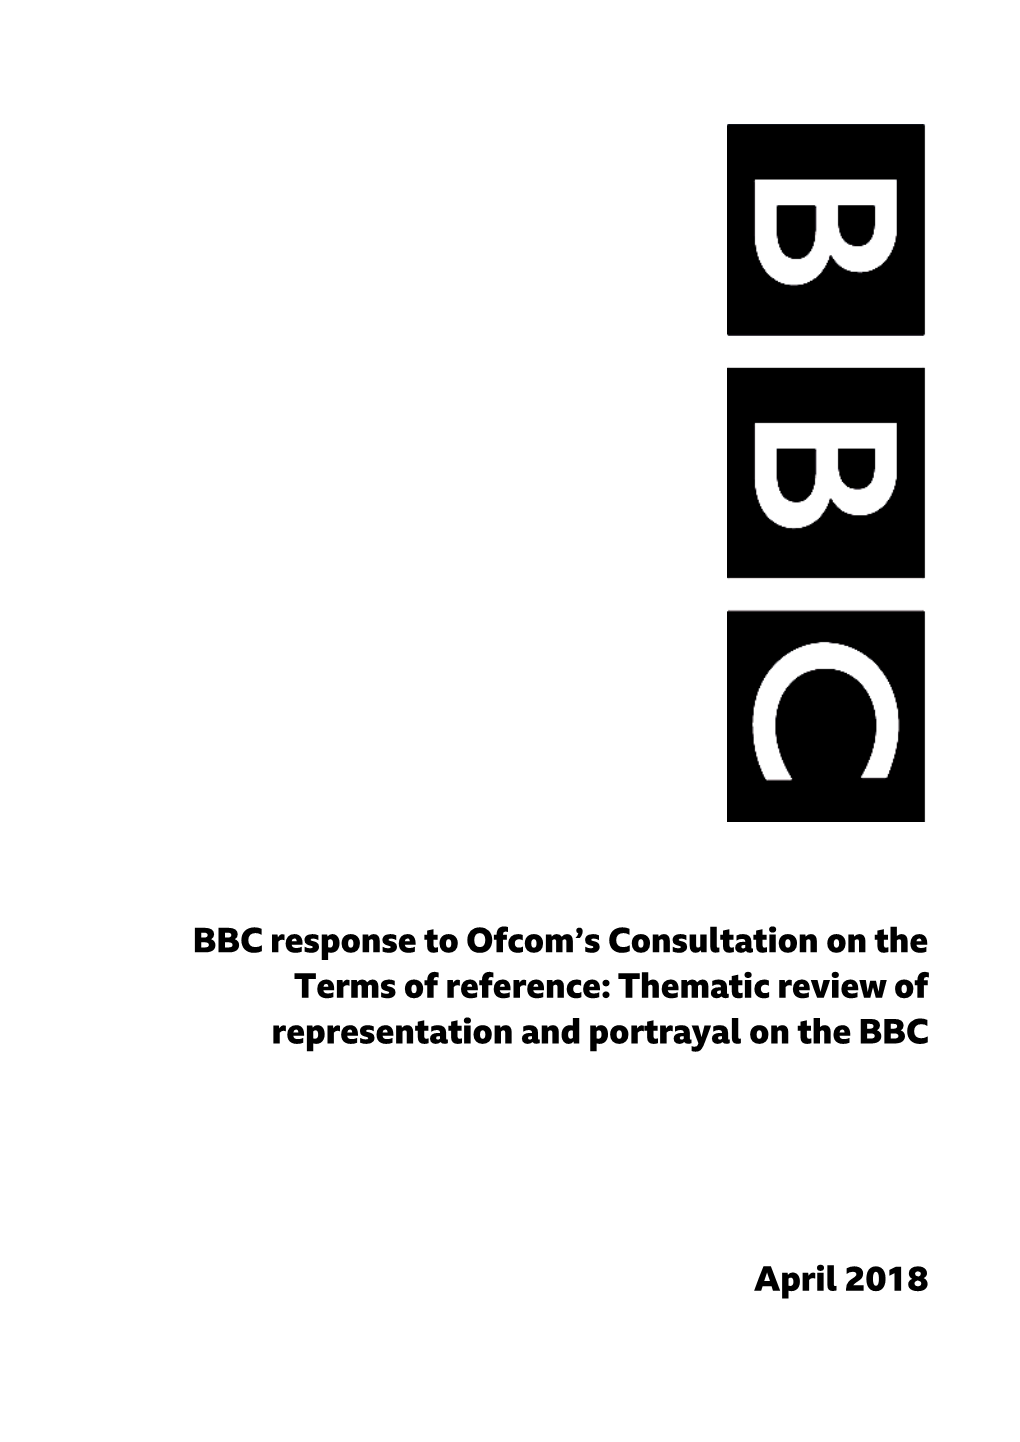 BBC Response to Ofcom’S Consultation on the Terms of Reference: Thematic Review of Representation and Portrayal on the BBC